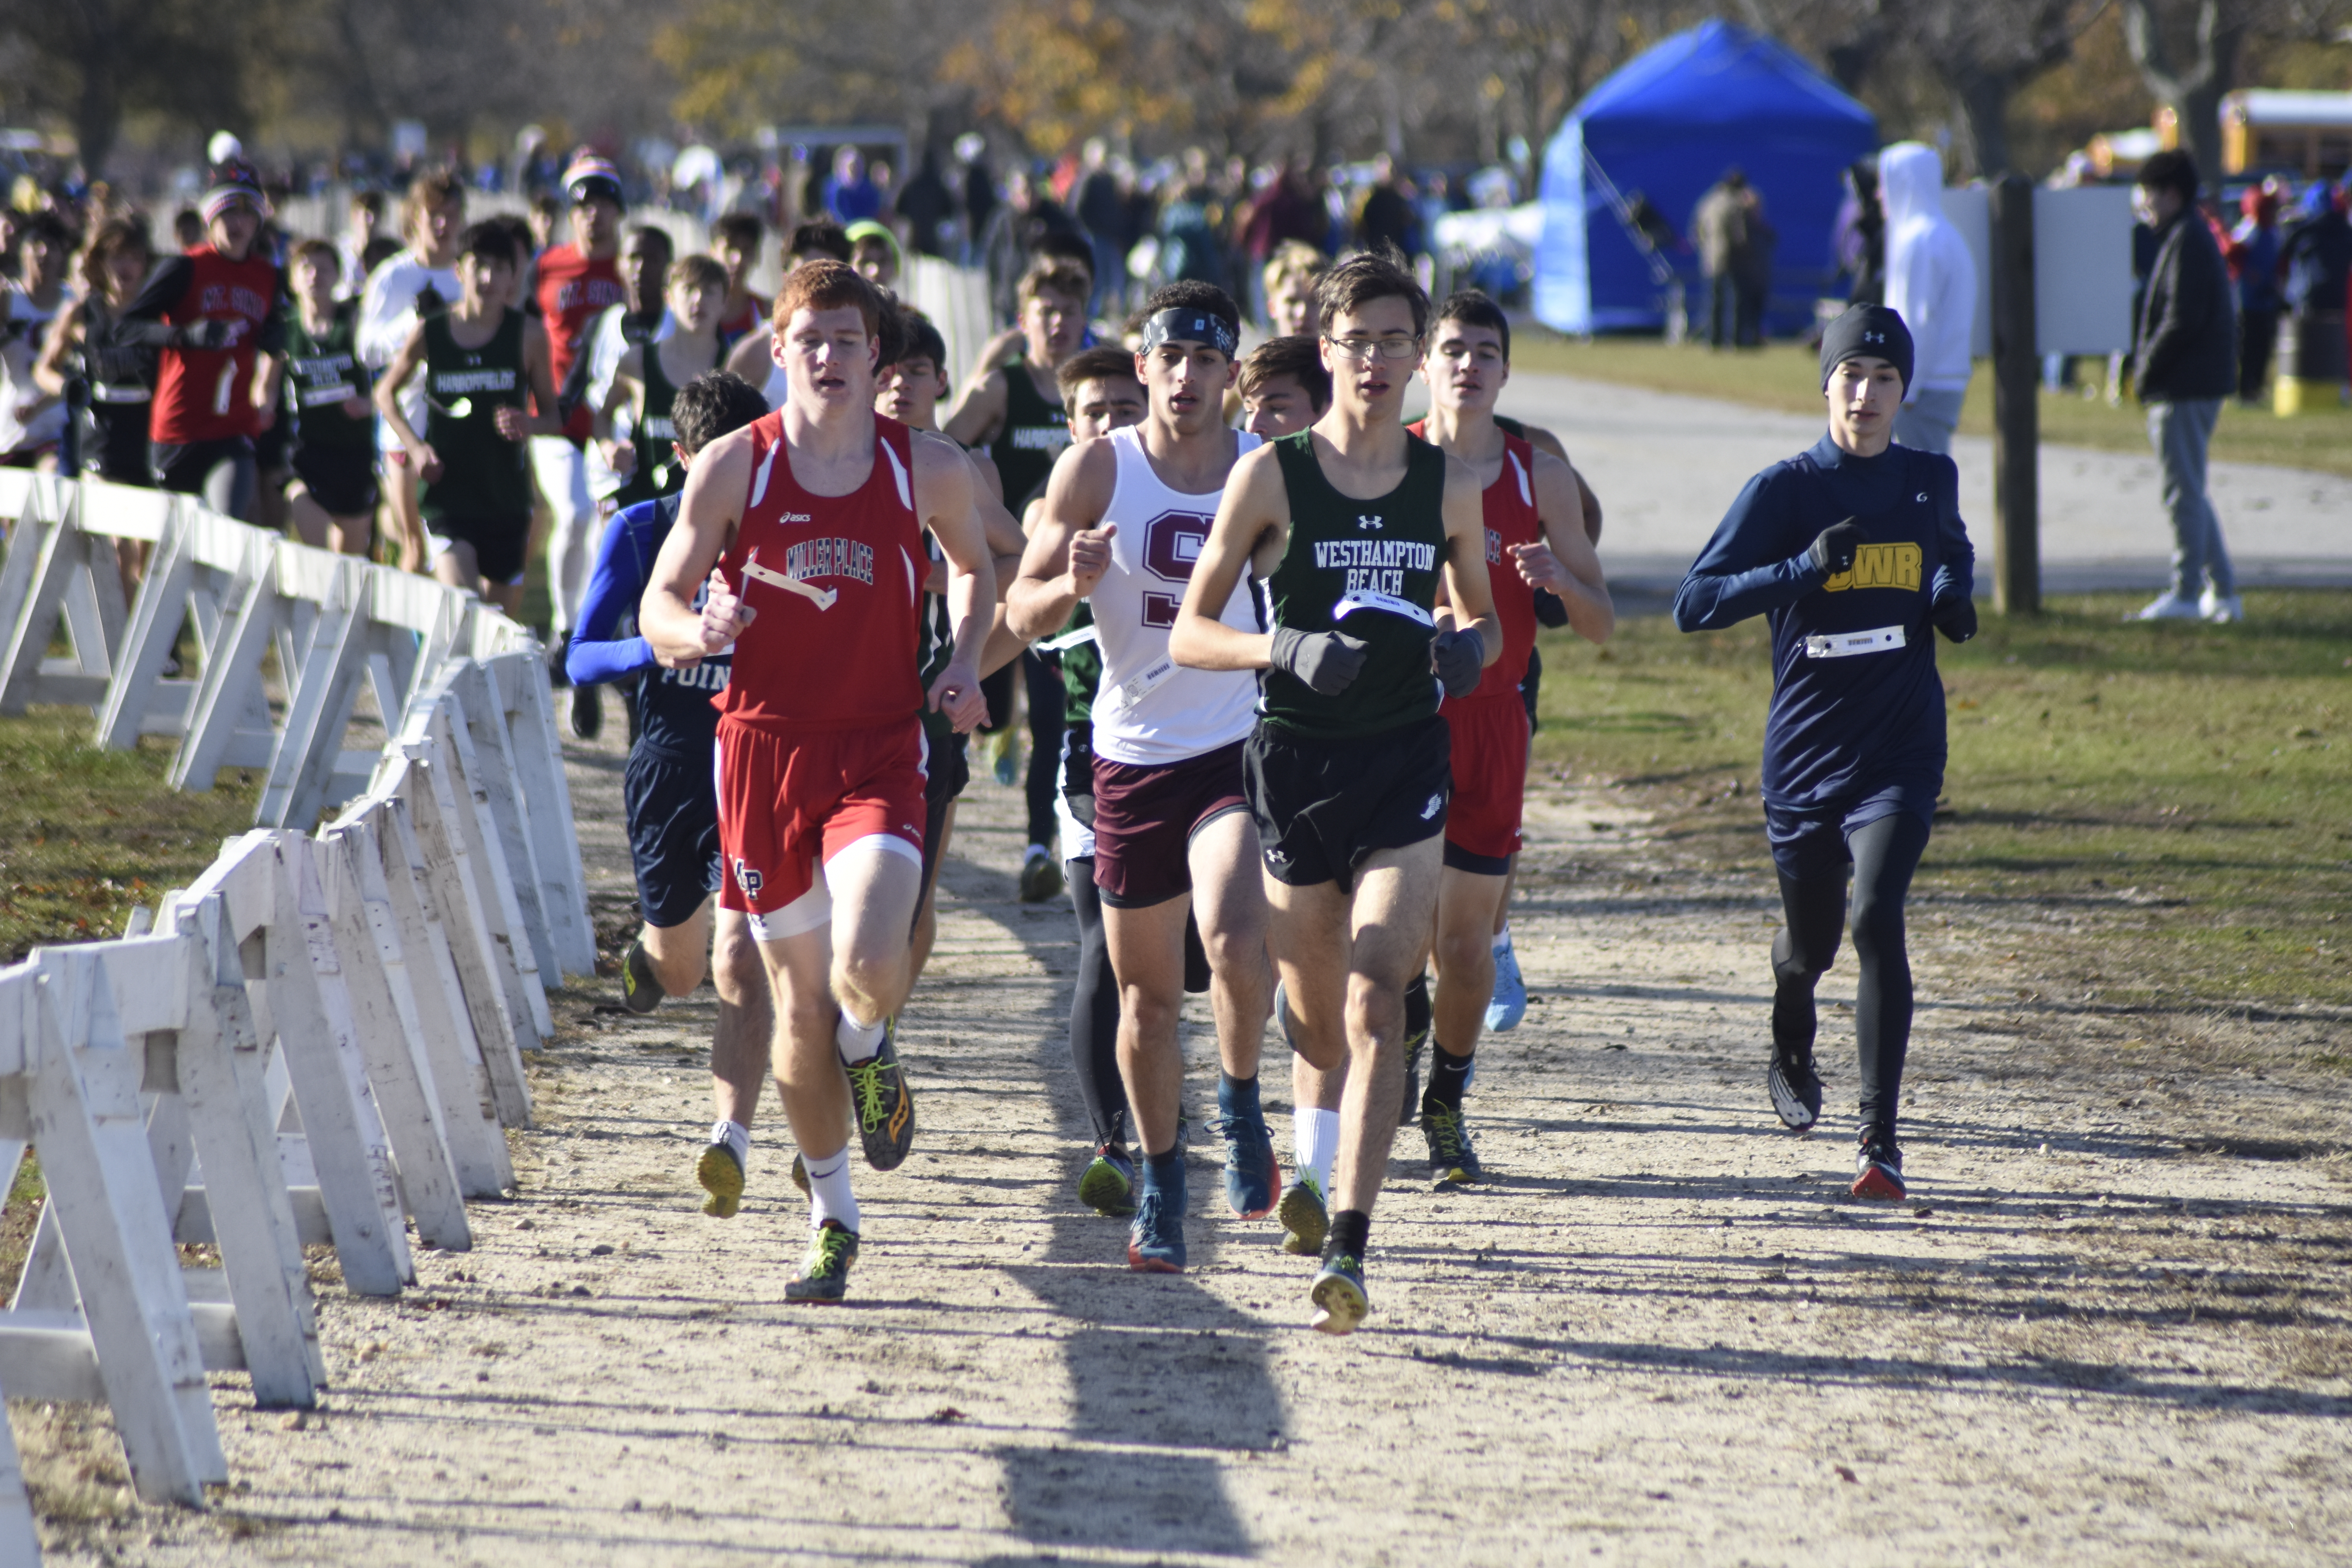 Gavin Ehlers of Westhampton Beach brings out the pack of runners quickly to start the race.